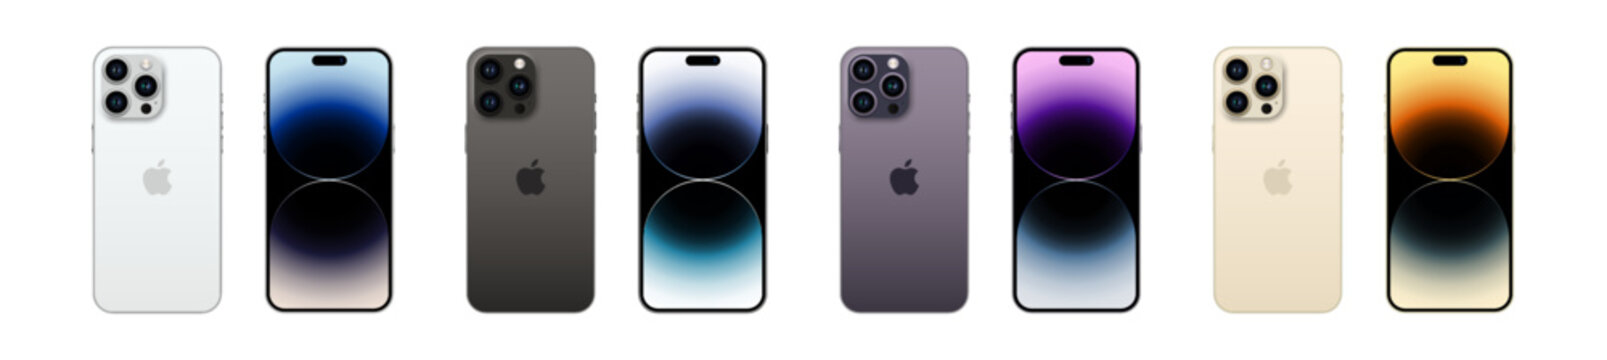 Rivne - October 10, 2022. Set of Iphone 14 pro max models in silver, black, purple and gold colors. Iphone wallpapers. Vector mockup.